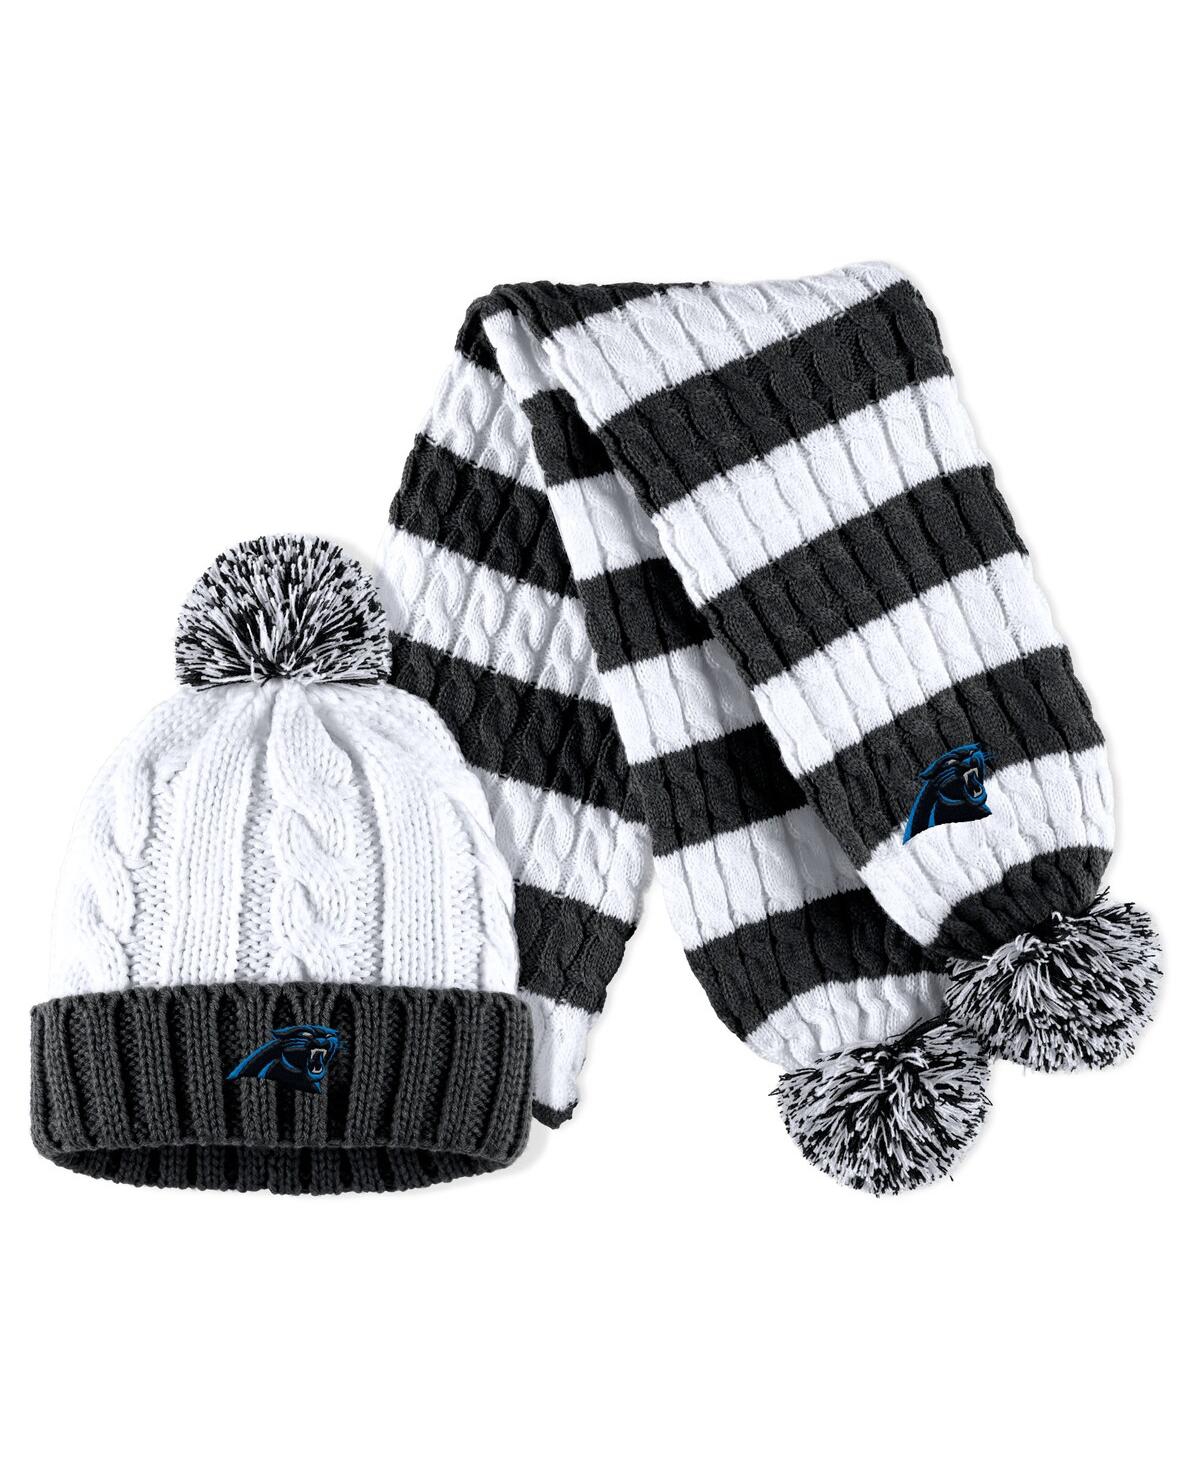 Shop Wear By Erin Andrews Women's  Black, White Carolina Panthers Cable Stripe Cuffed Knit Hat With Pom An In Black,white